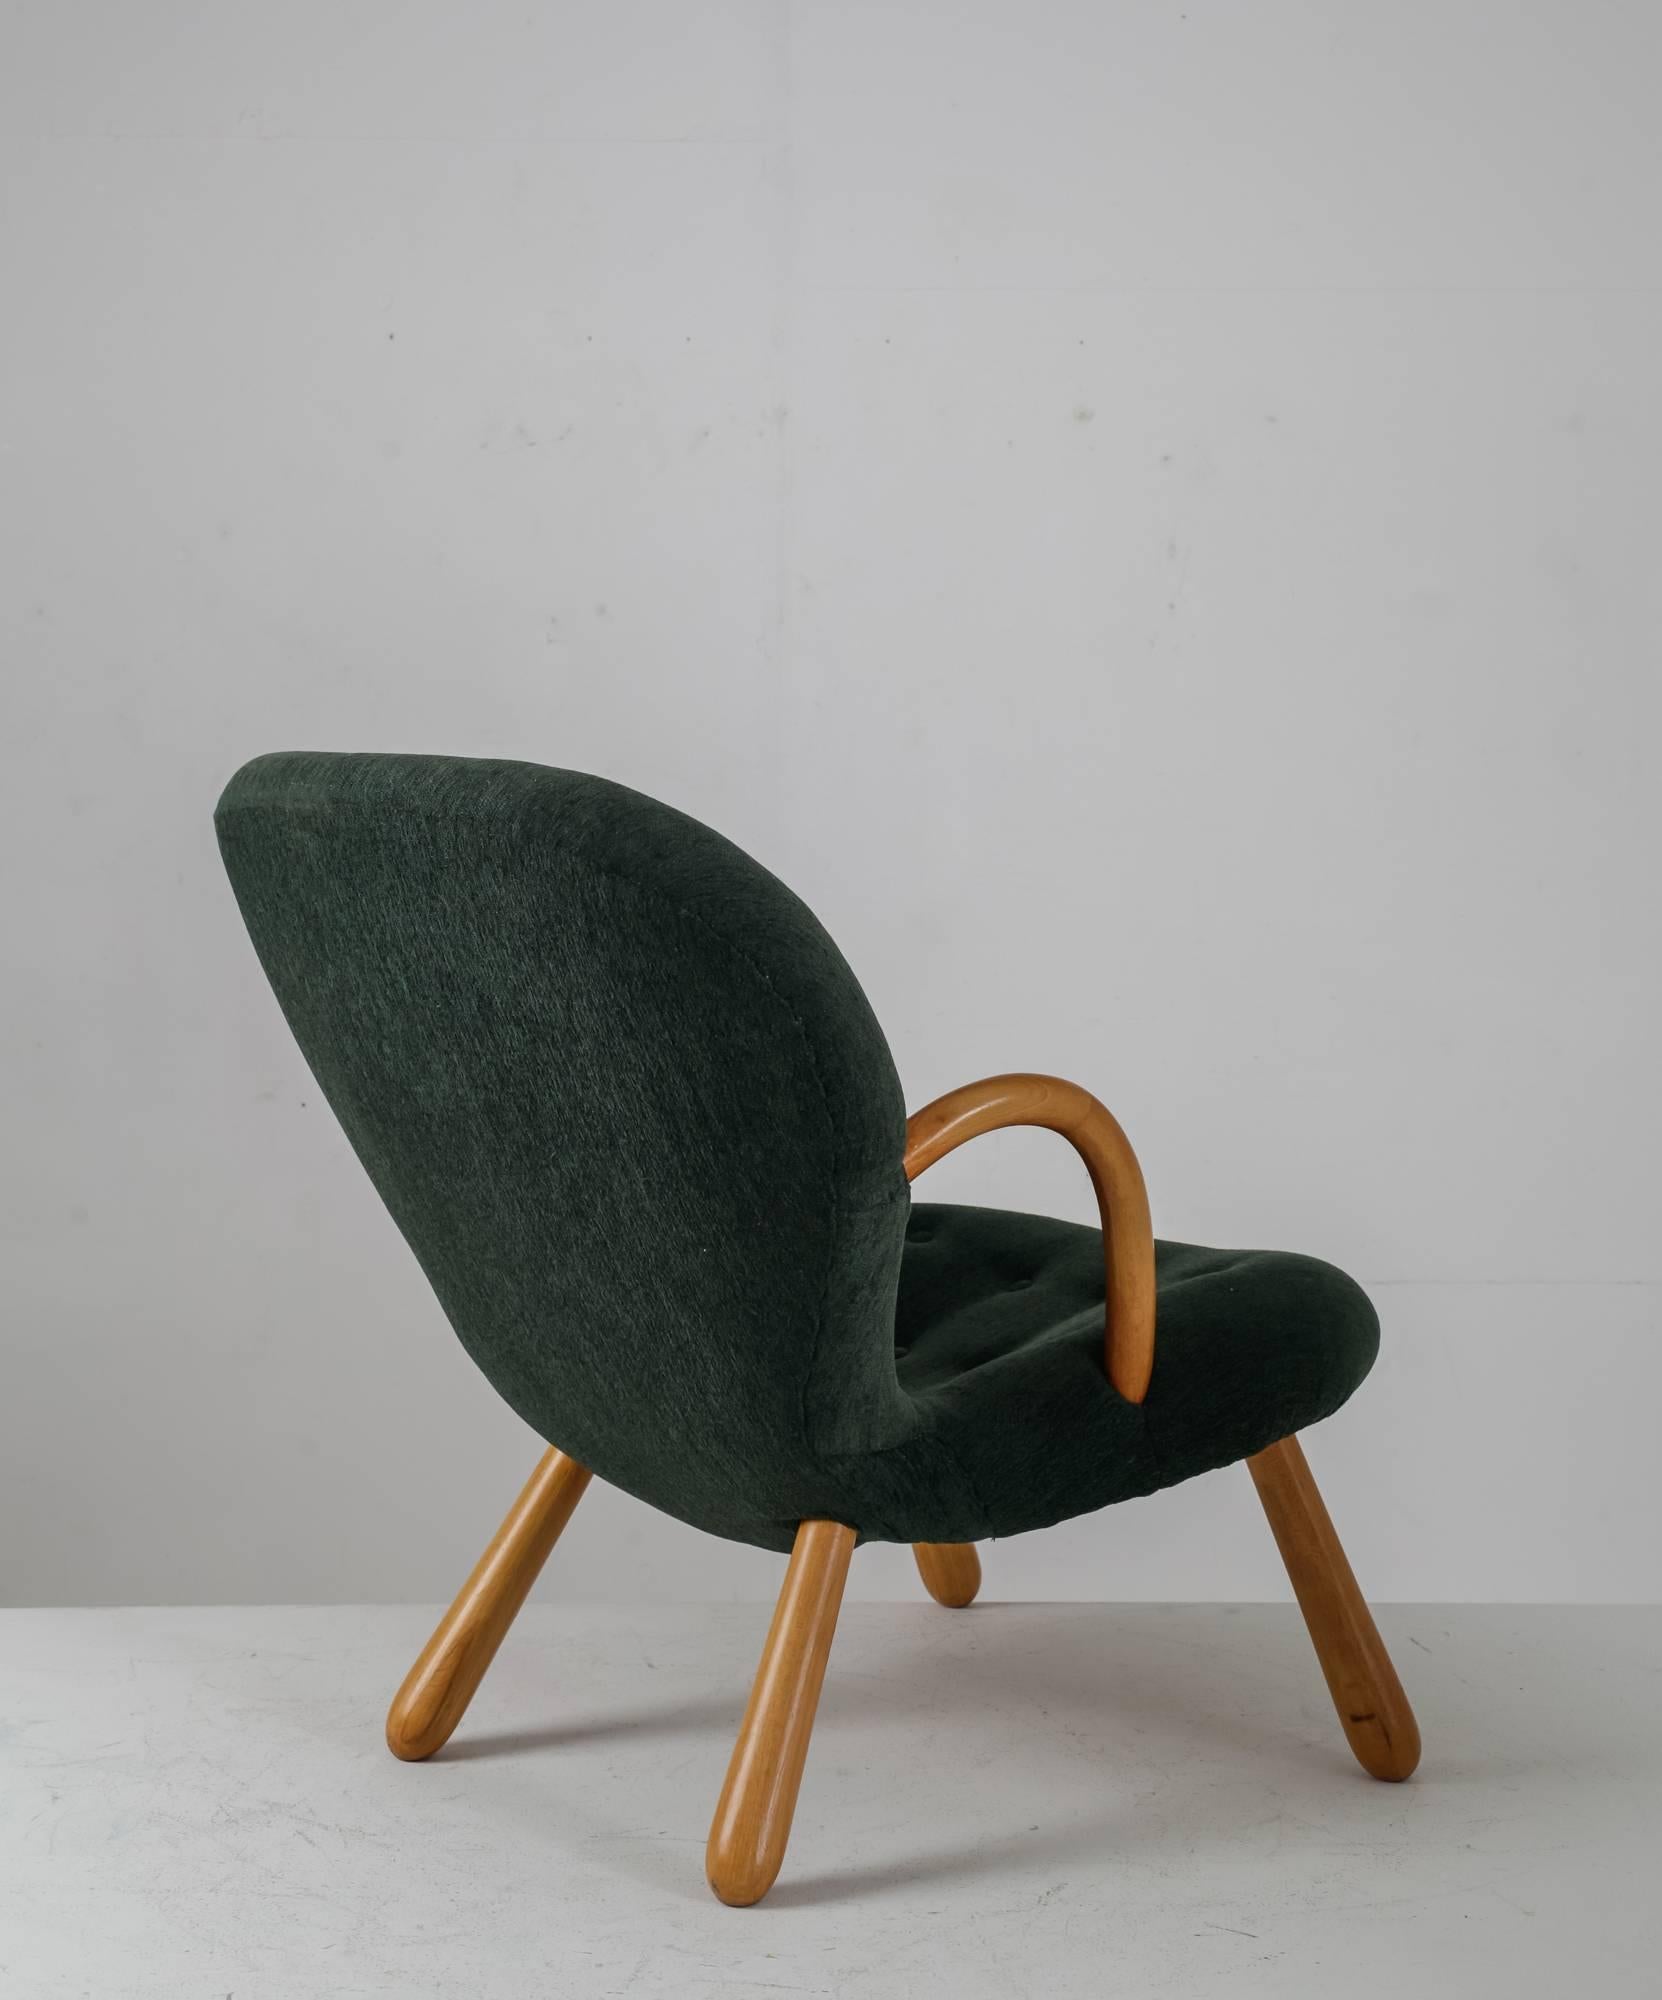 Danish Philip Arctander Clam Chair with Green Upholstery, Denmark, 1940s For Sale